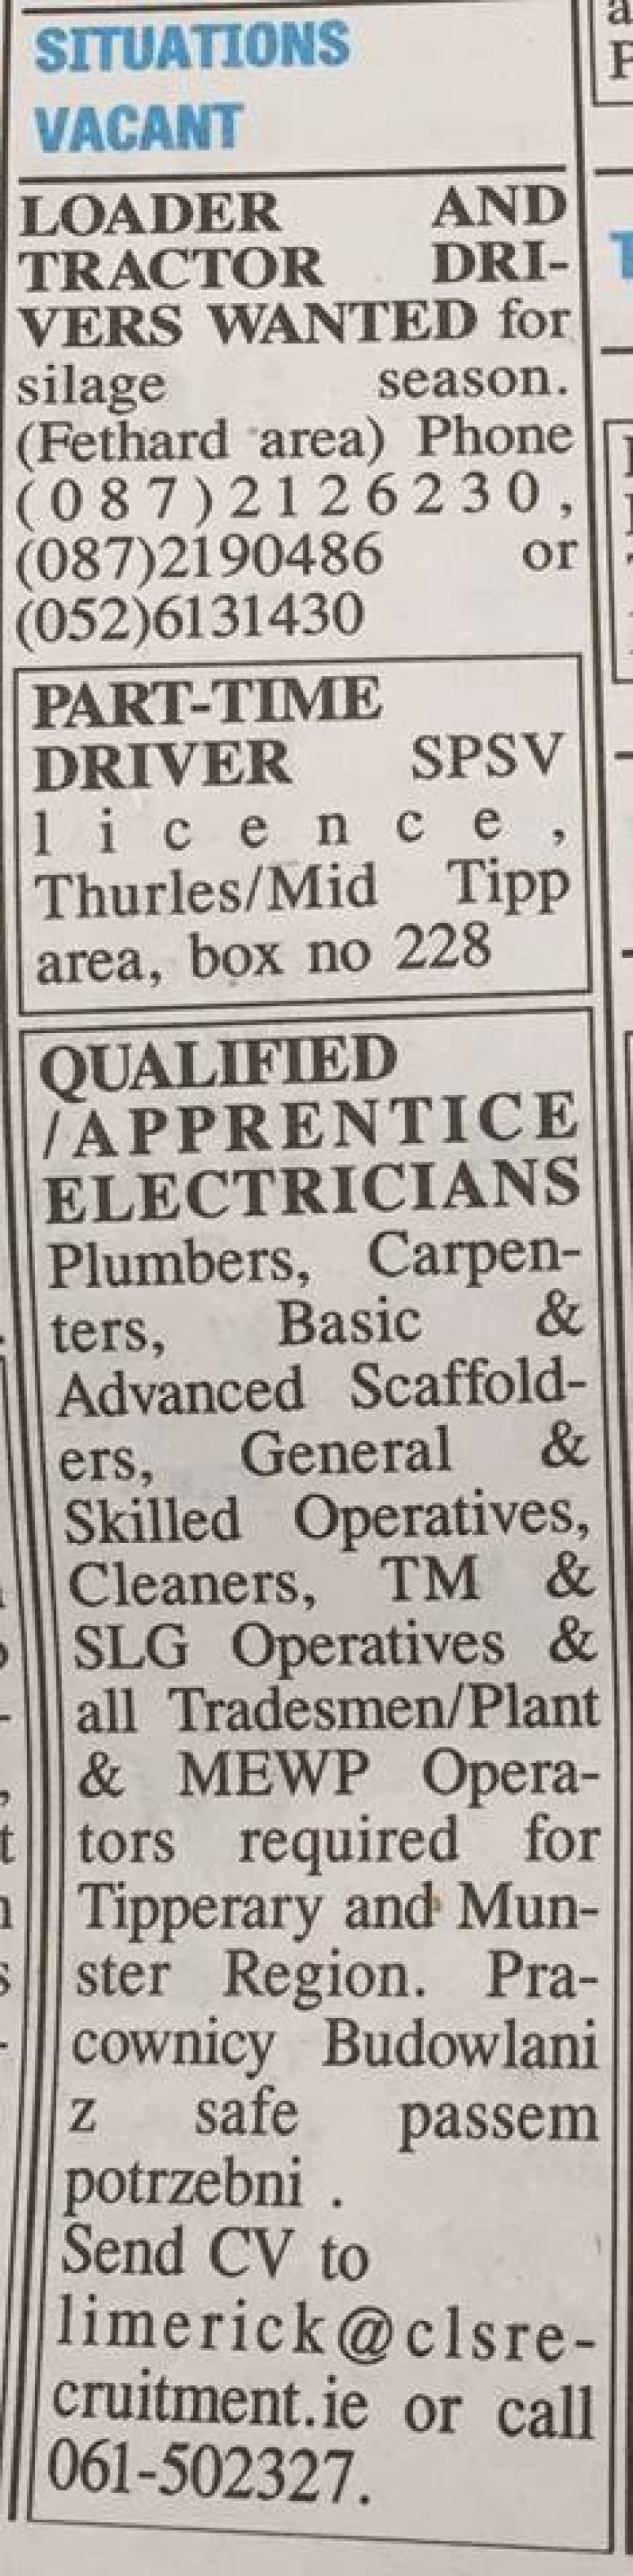 Tipperary Star - Situations Vacant